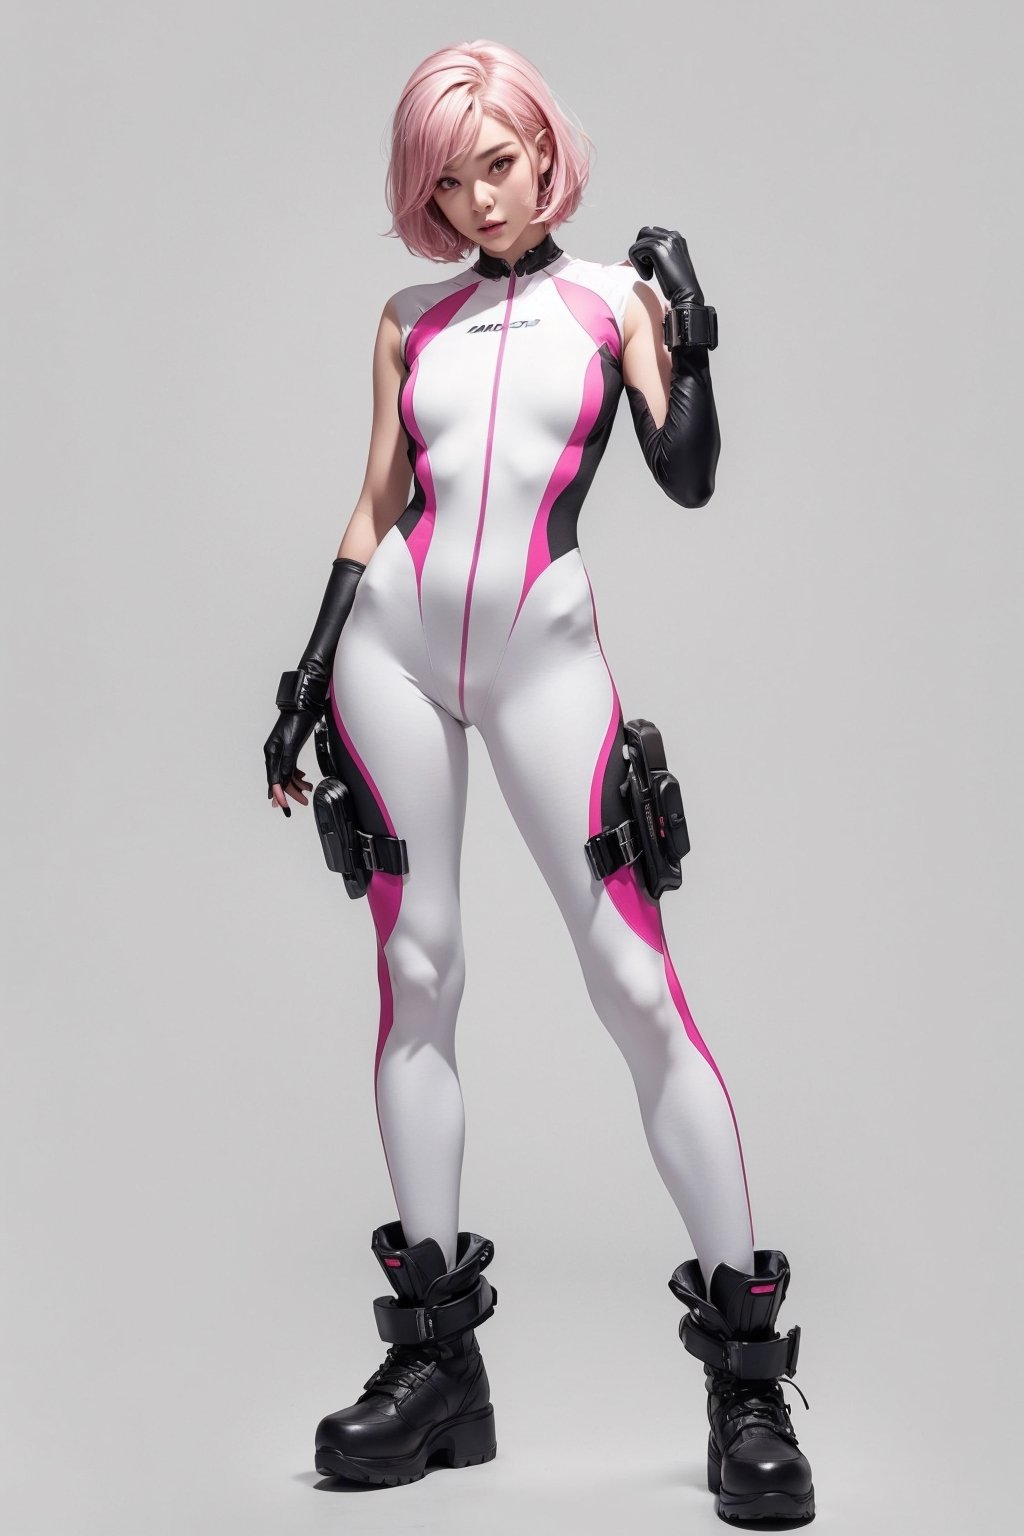  1 girl (best quality), full body, pink hair, short bob hair, astro costume, purple eyes, tight bodysuit, transparent bodysuit, leotard, pose character characteristics, standing pose relaxed arms, neutral standing pose, character characteristics character, full character, futuristic footwear, cyberpunk style, masamune shirow style, neco style, No background, light background, white background, plain white background, no background, clean background, jumpsuit,th1nsh1rtng,leggings,SAM YANG